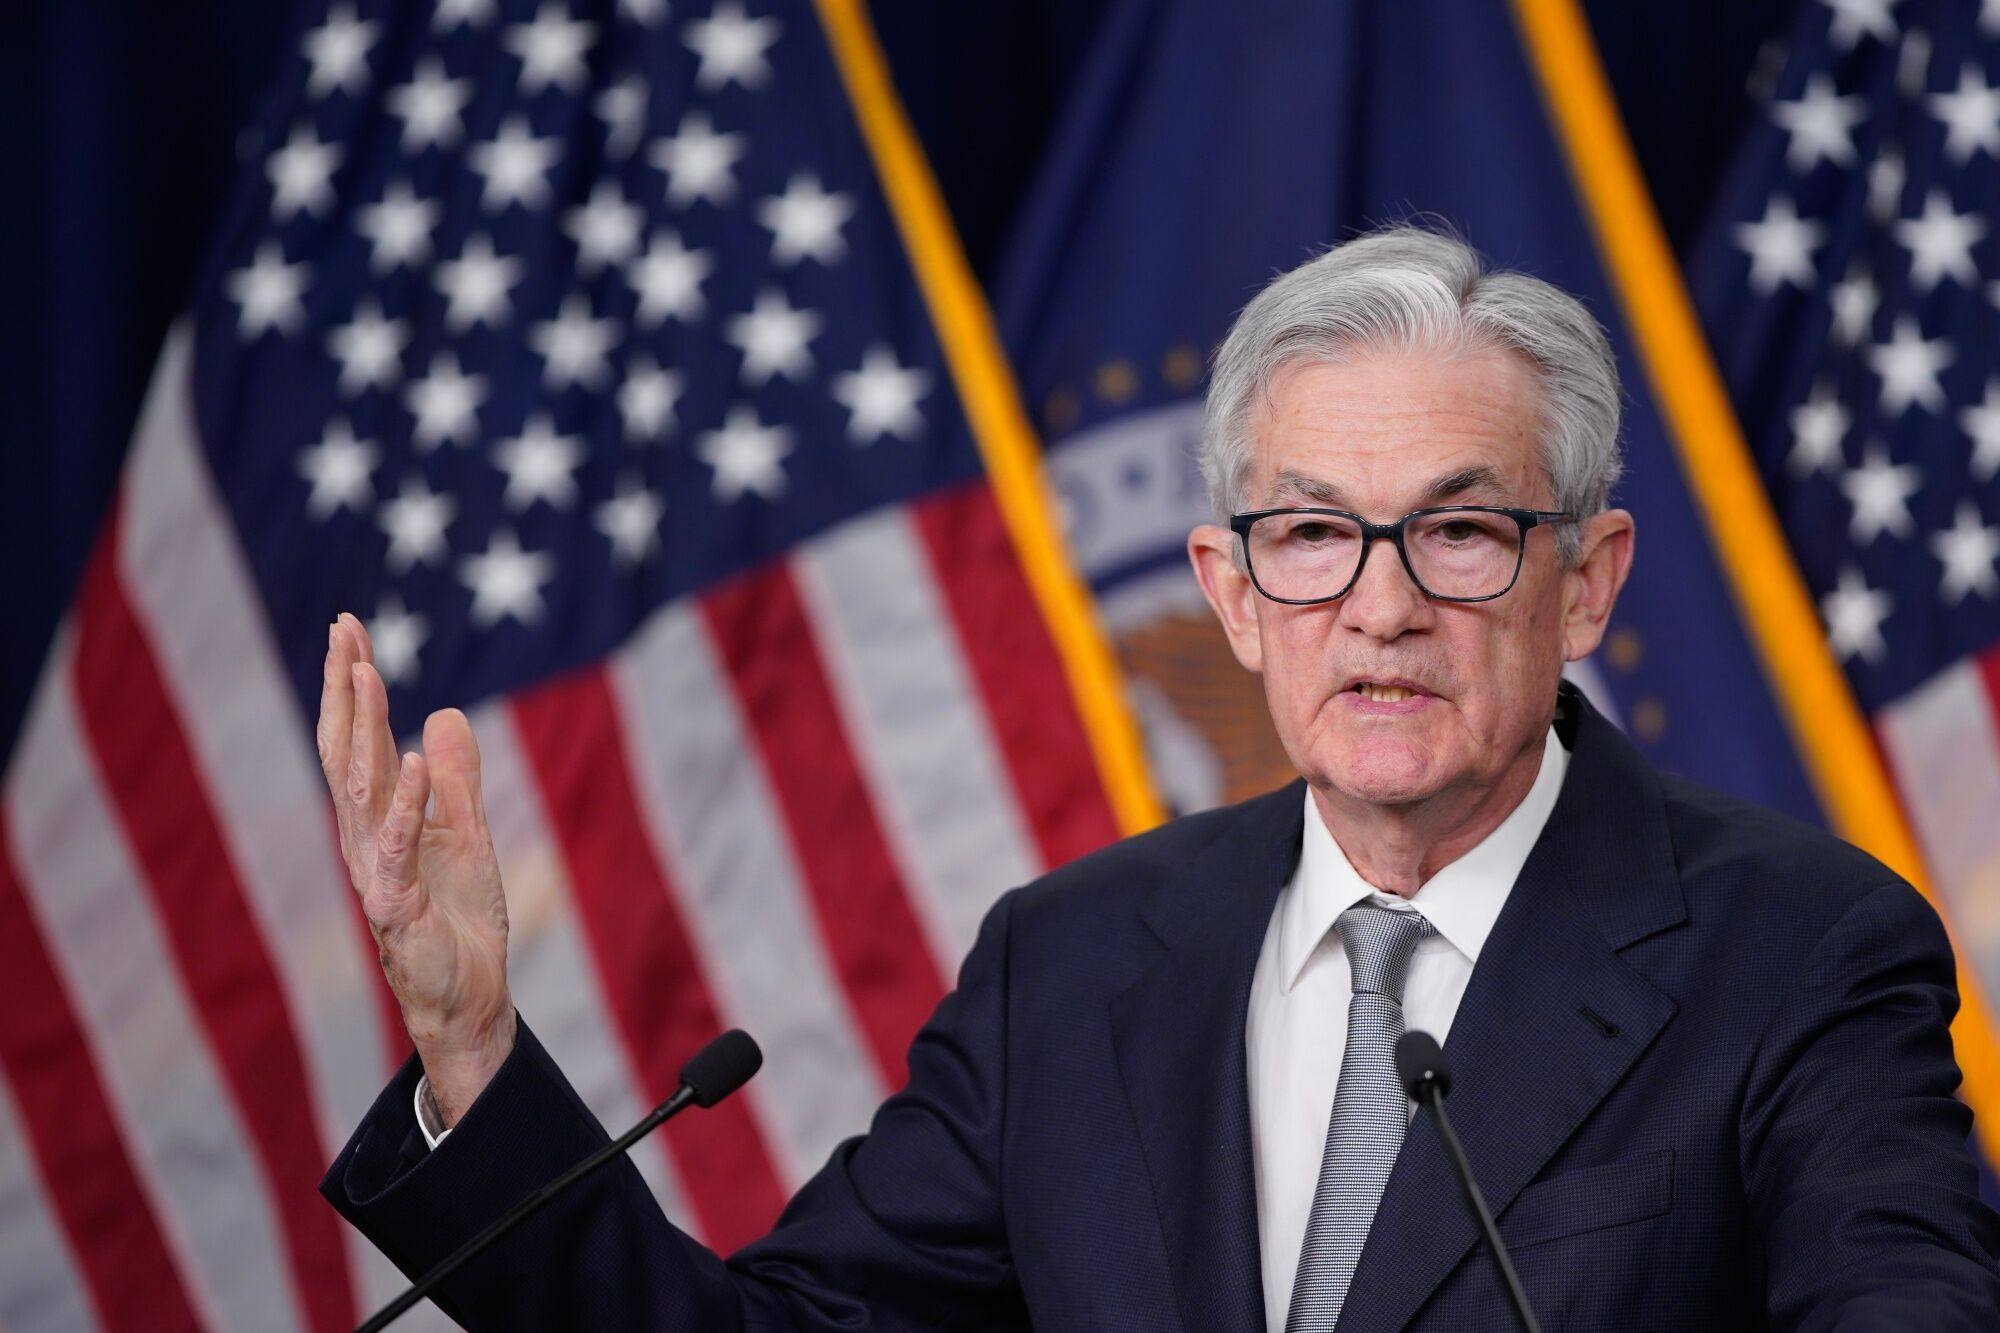 Jerome Powell, chairman of the US Federal Reserve, speaks on Wednesday in Washington. He announced that interest rates would be kept unchanged, at a 22-year high. Photo: Bloomberg